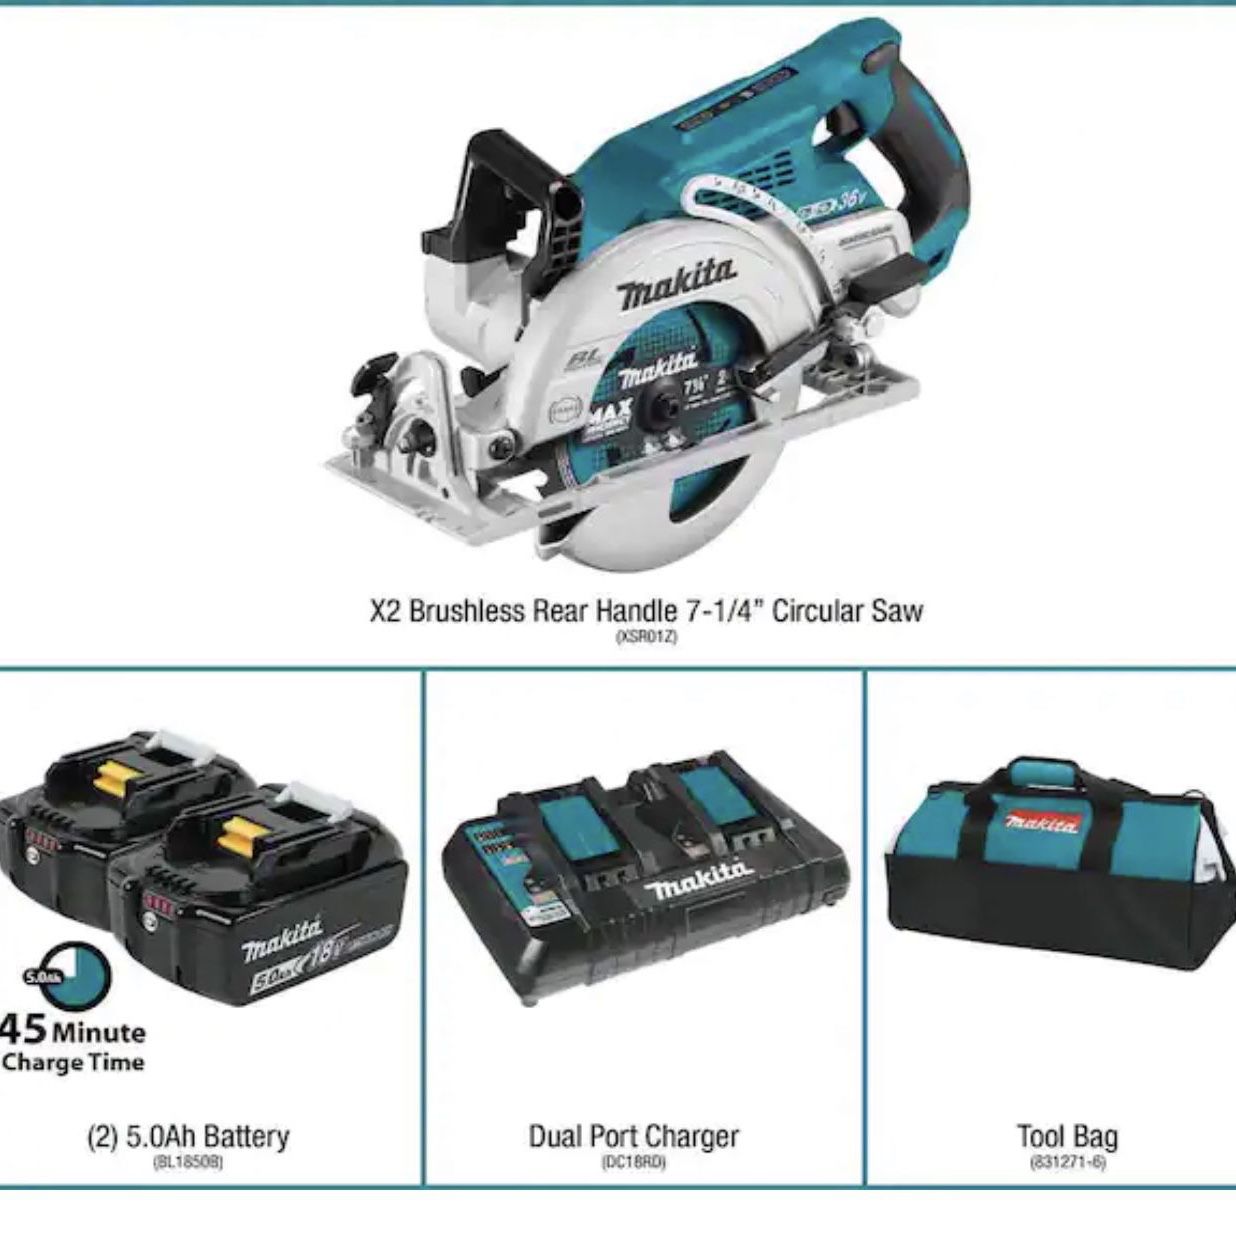 Makita 18V X2 LXT 5.0Ah Lithium-Ion (36V) Brushless Cordless Rear Handle 7-1 /4 in. Circular Saw Kit for Sale in Lombard, IL OfferUp